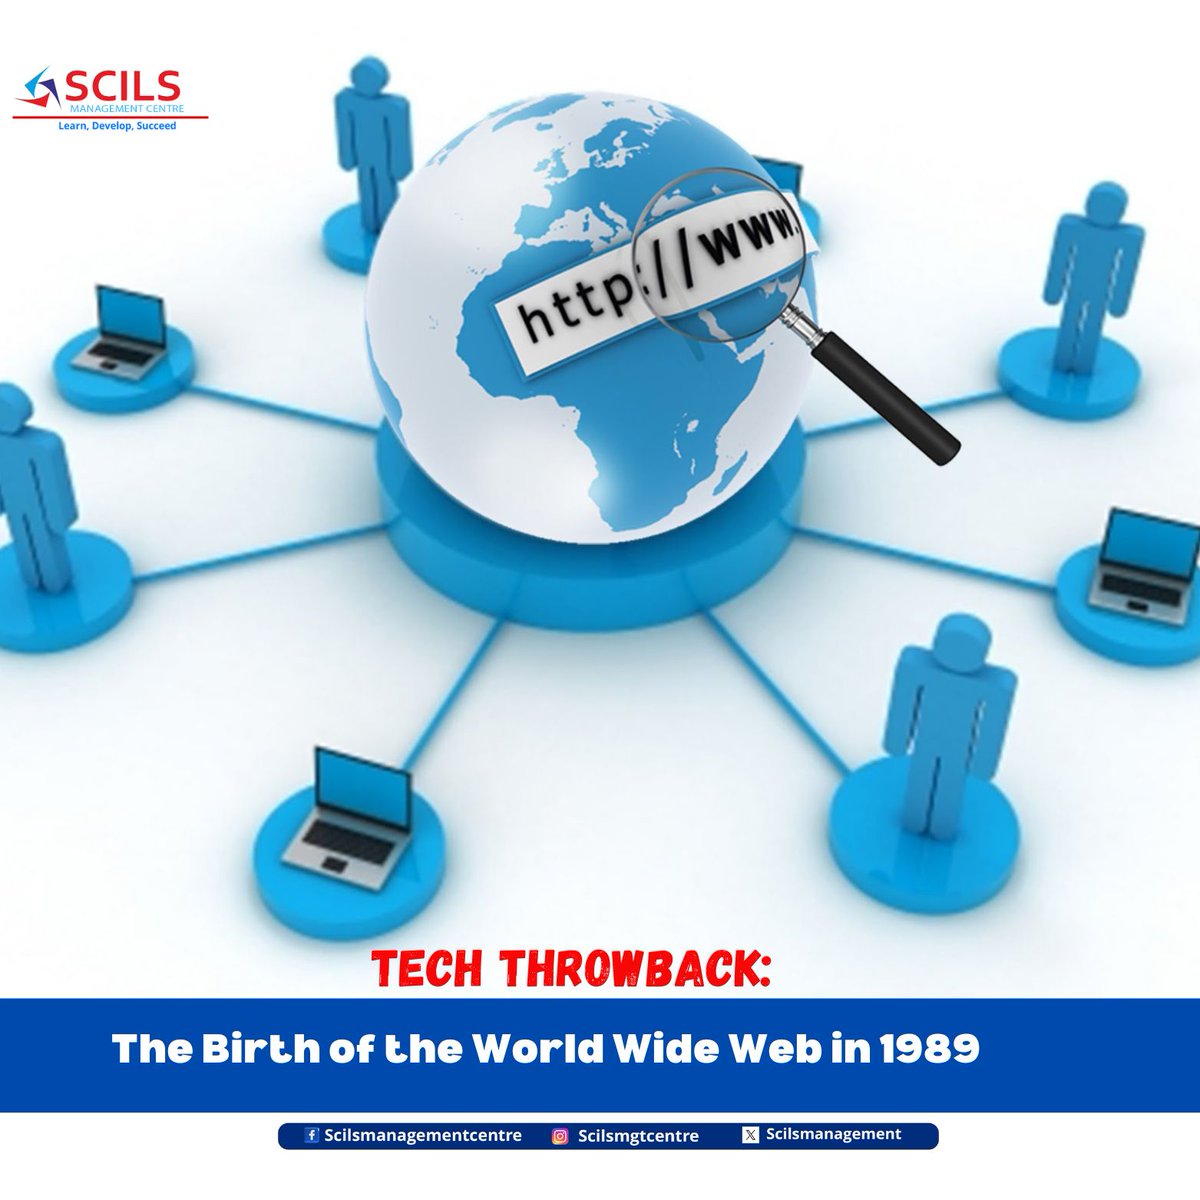 Imagine a world without the web! In 1989, Tim Berners-Lee proposed the World Wide Web project, forever changing how we access information. 

How has it revolutionized the way you connect, learn, and explore? Share your thoughts!  

#WorldWideWebDay #WebInnovation